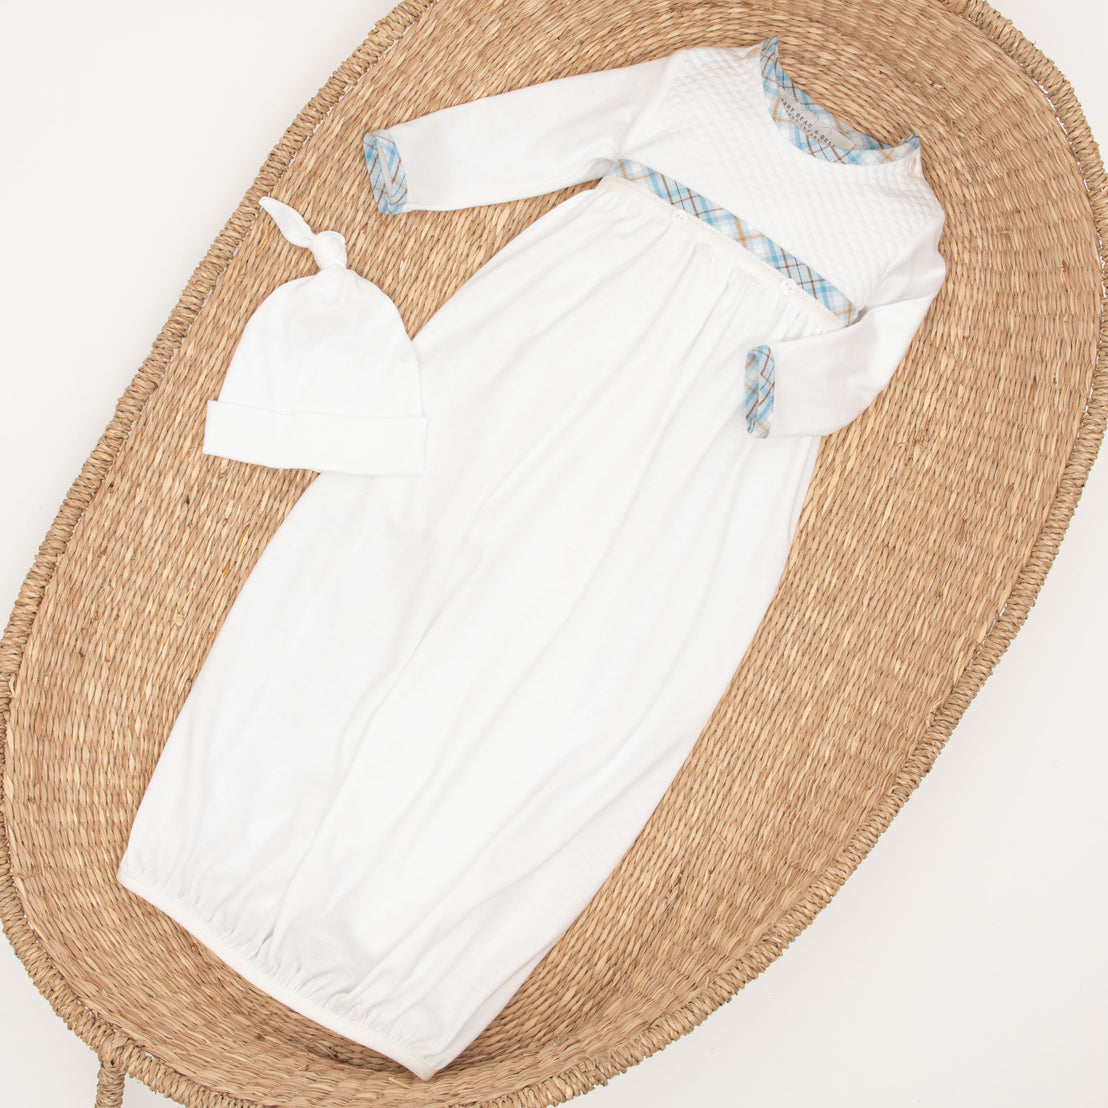 An upscale Mason Newborn Gown with blue trim in a wicker basket, accompanied by a matching heirloom hat, on a beige background.